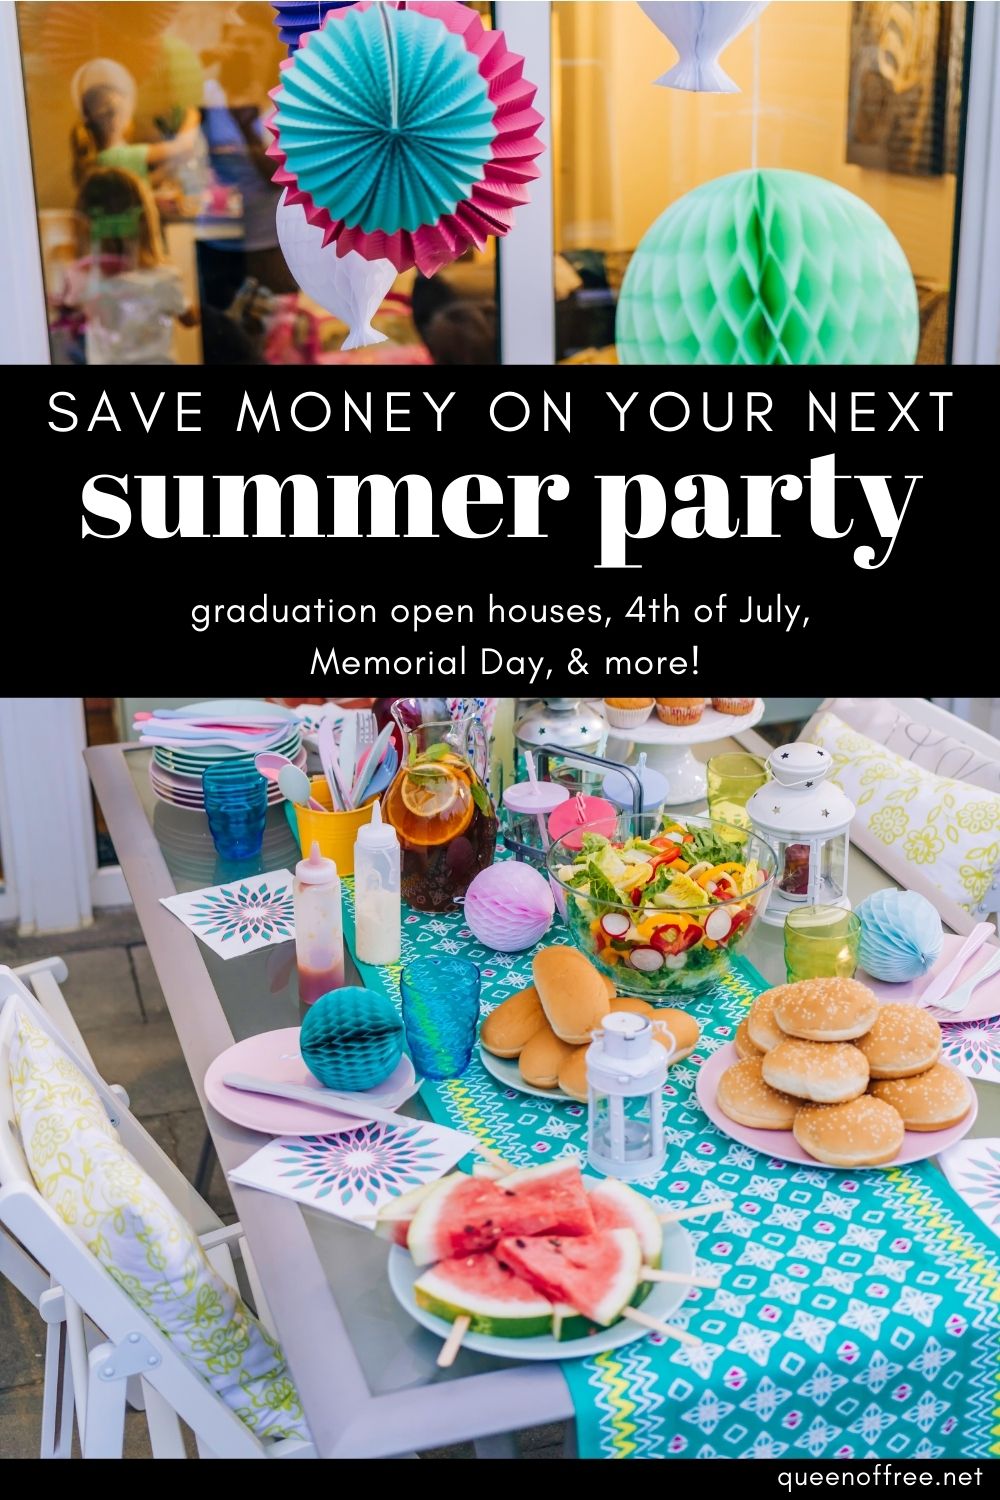 Graduation Open Houses, Memorial Day, Father's Day, 4th of July, and more - save money on your next summer party with these tips!